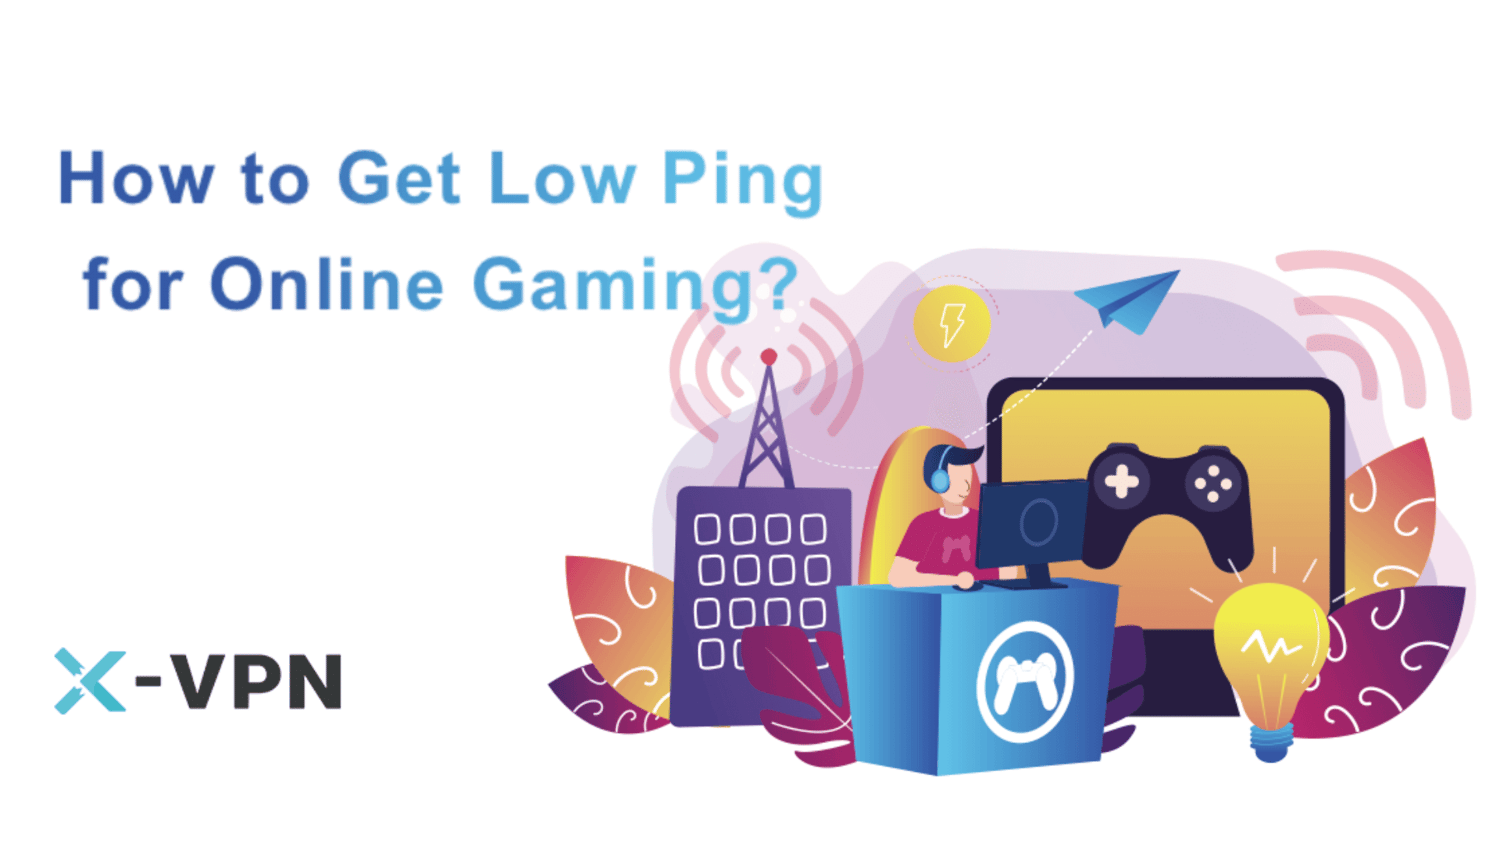 How to reduce ping for online gaming?